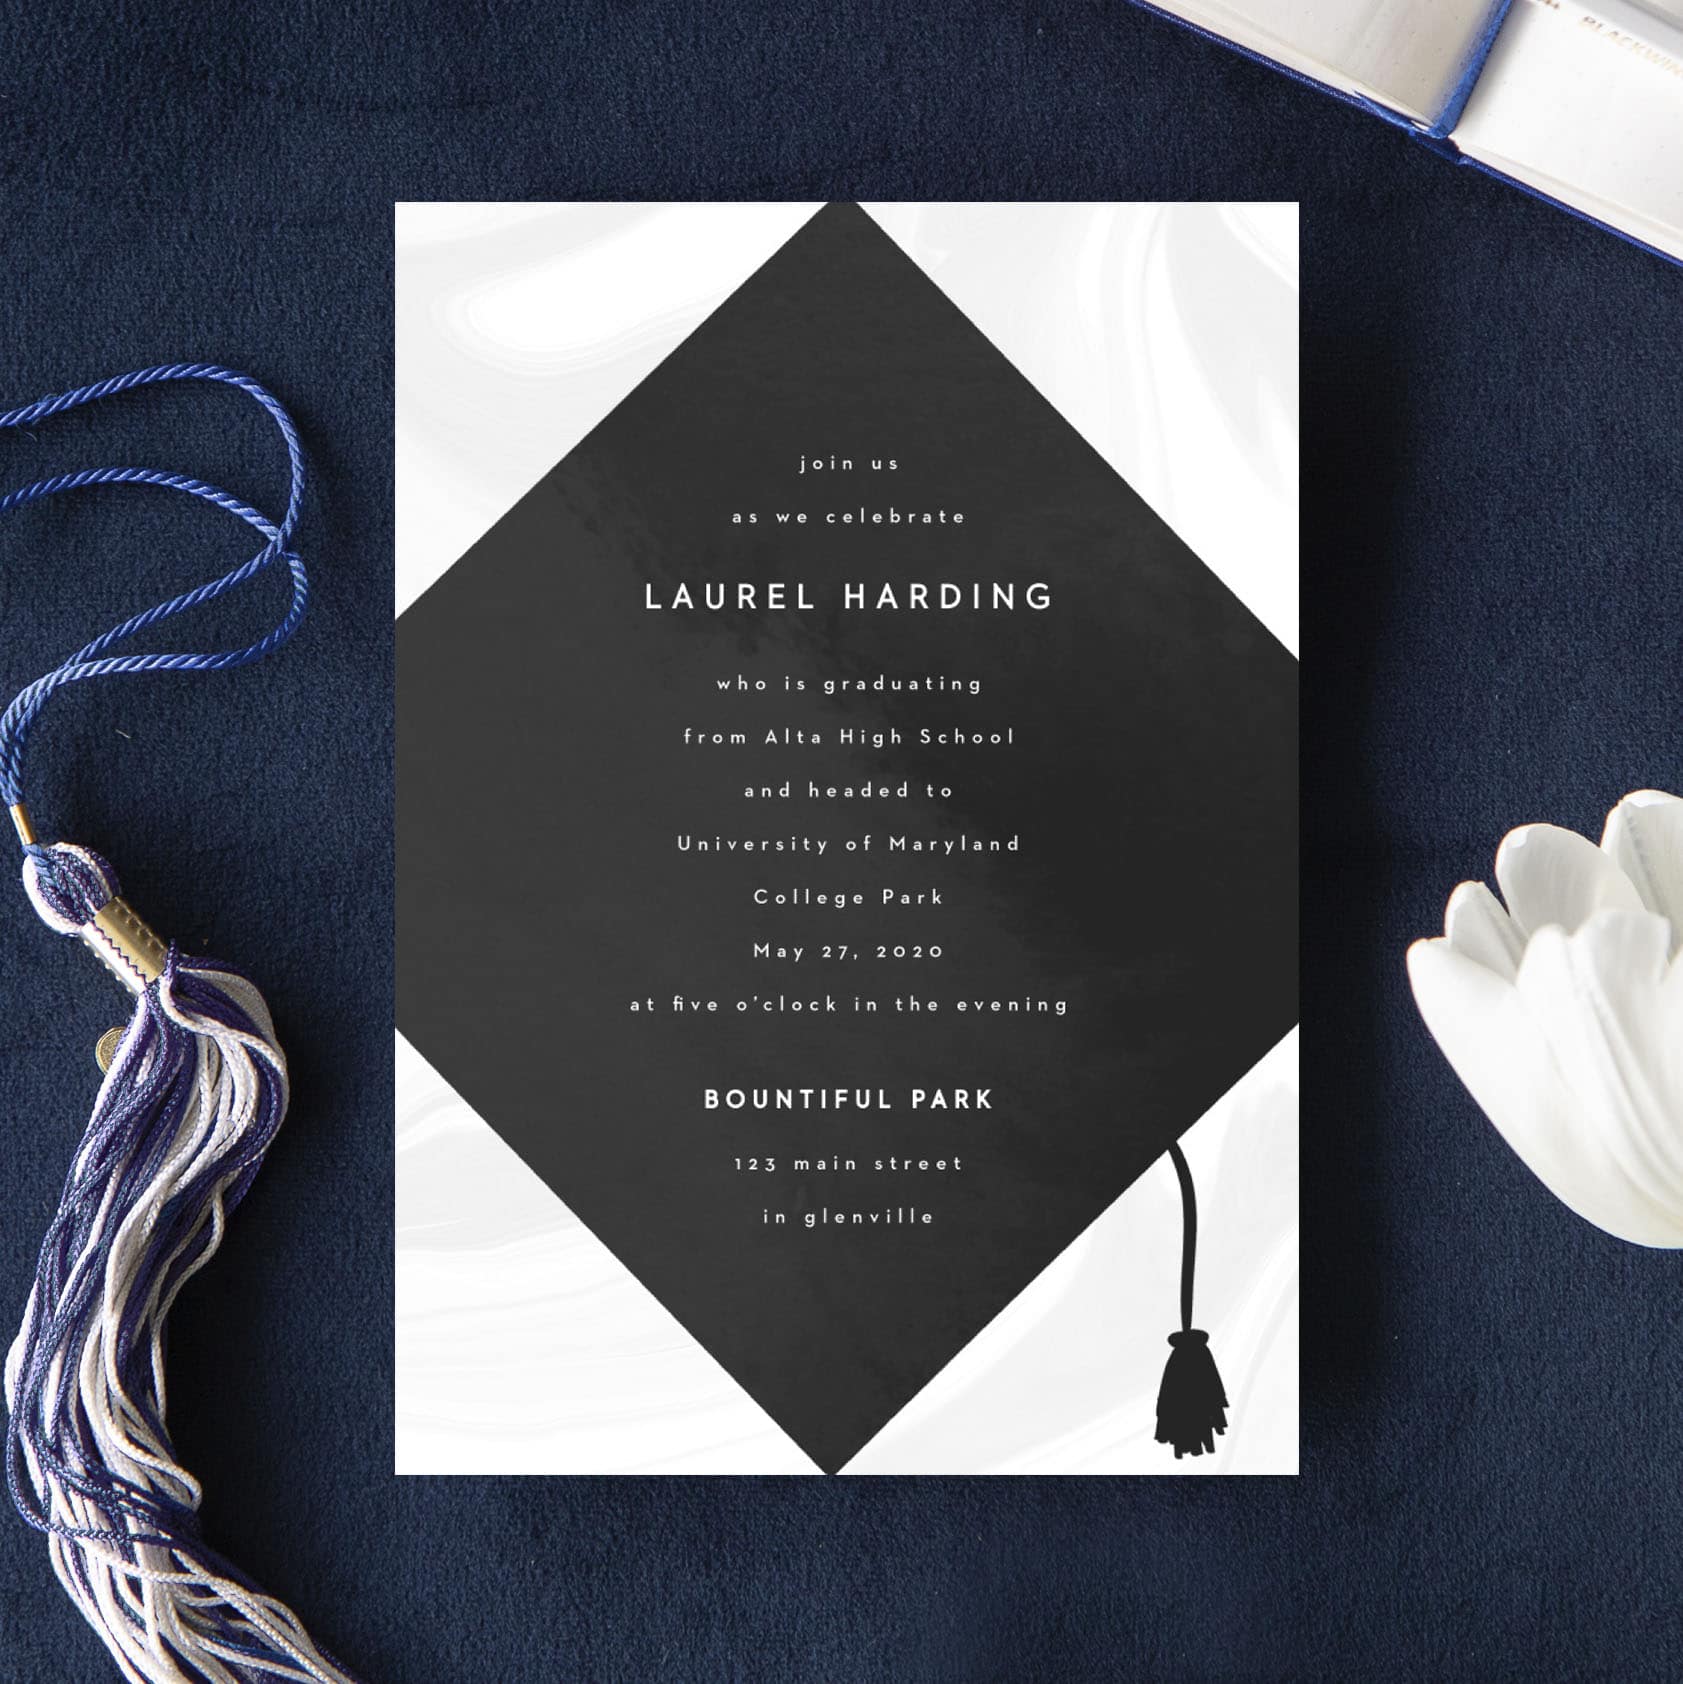 Navy Velvet5 - Find Some Useful Tips on College Graduation Announcements & Invitations